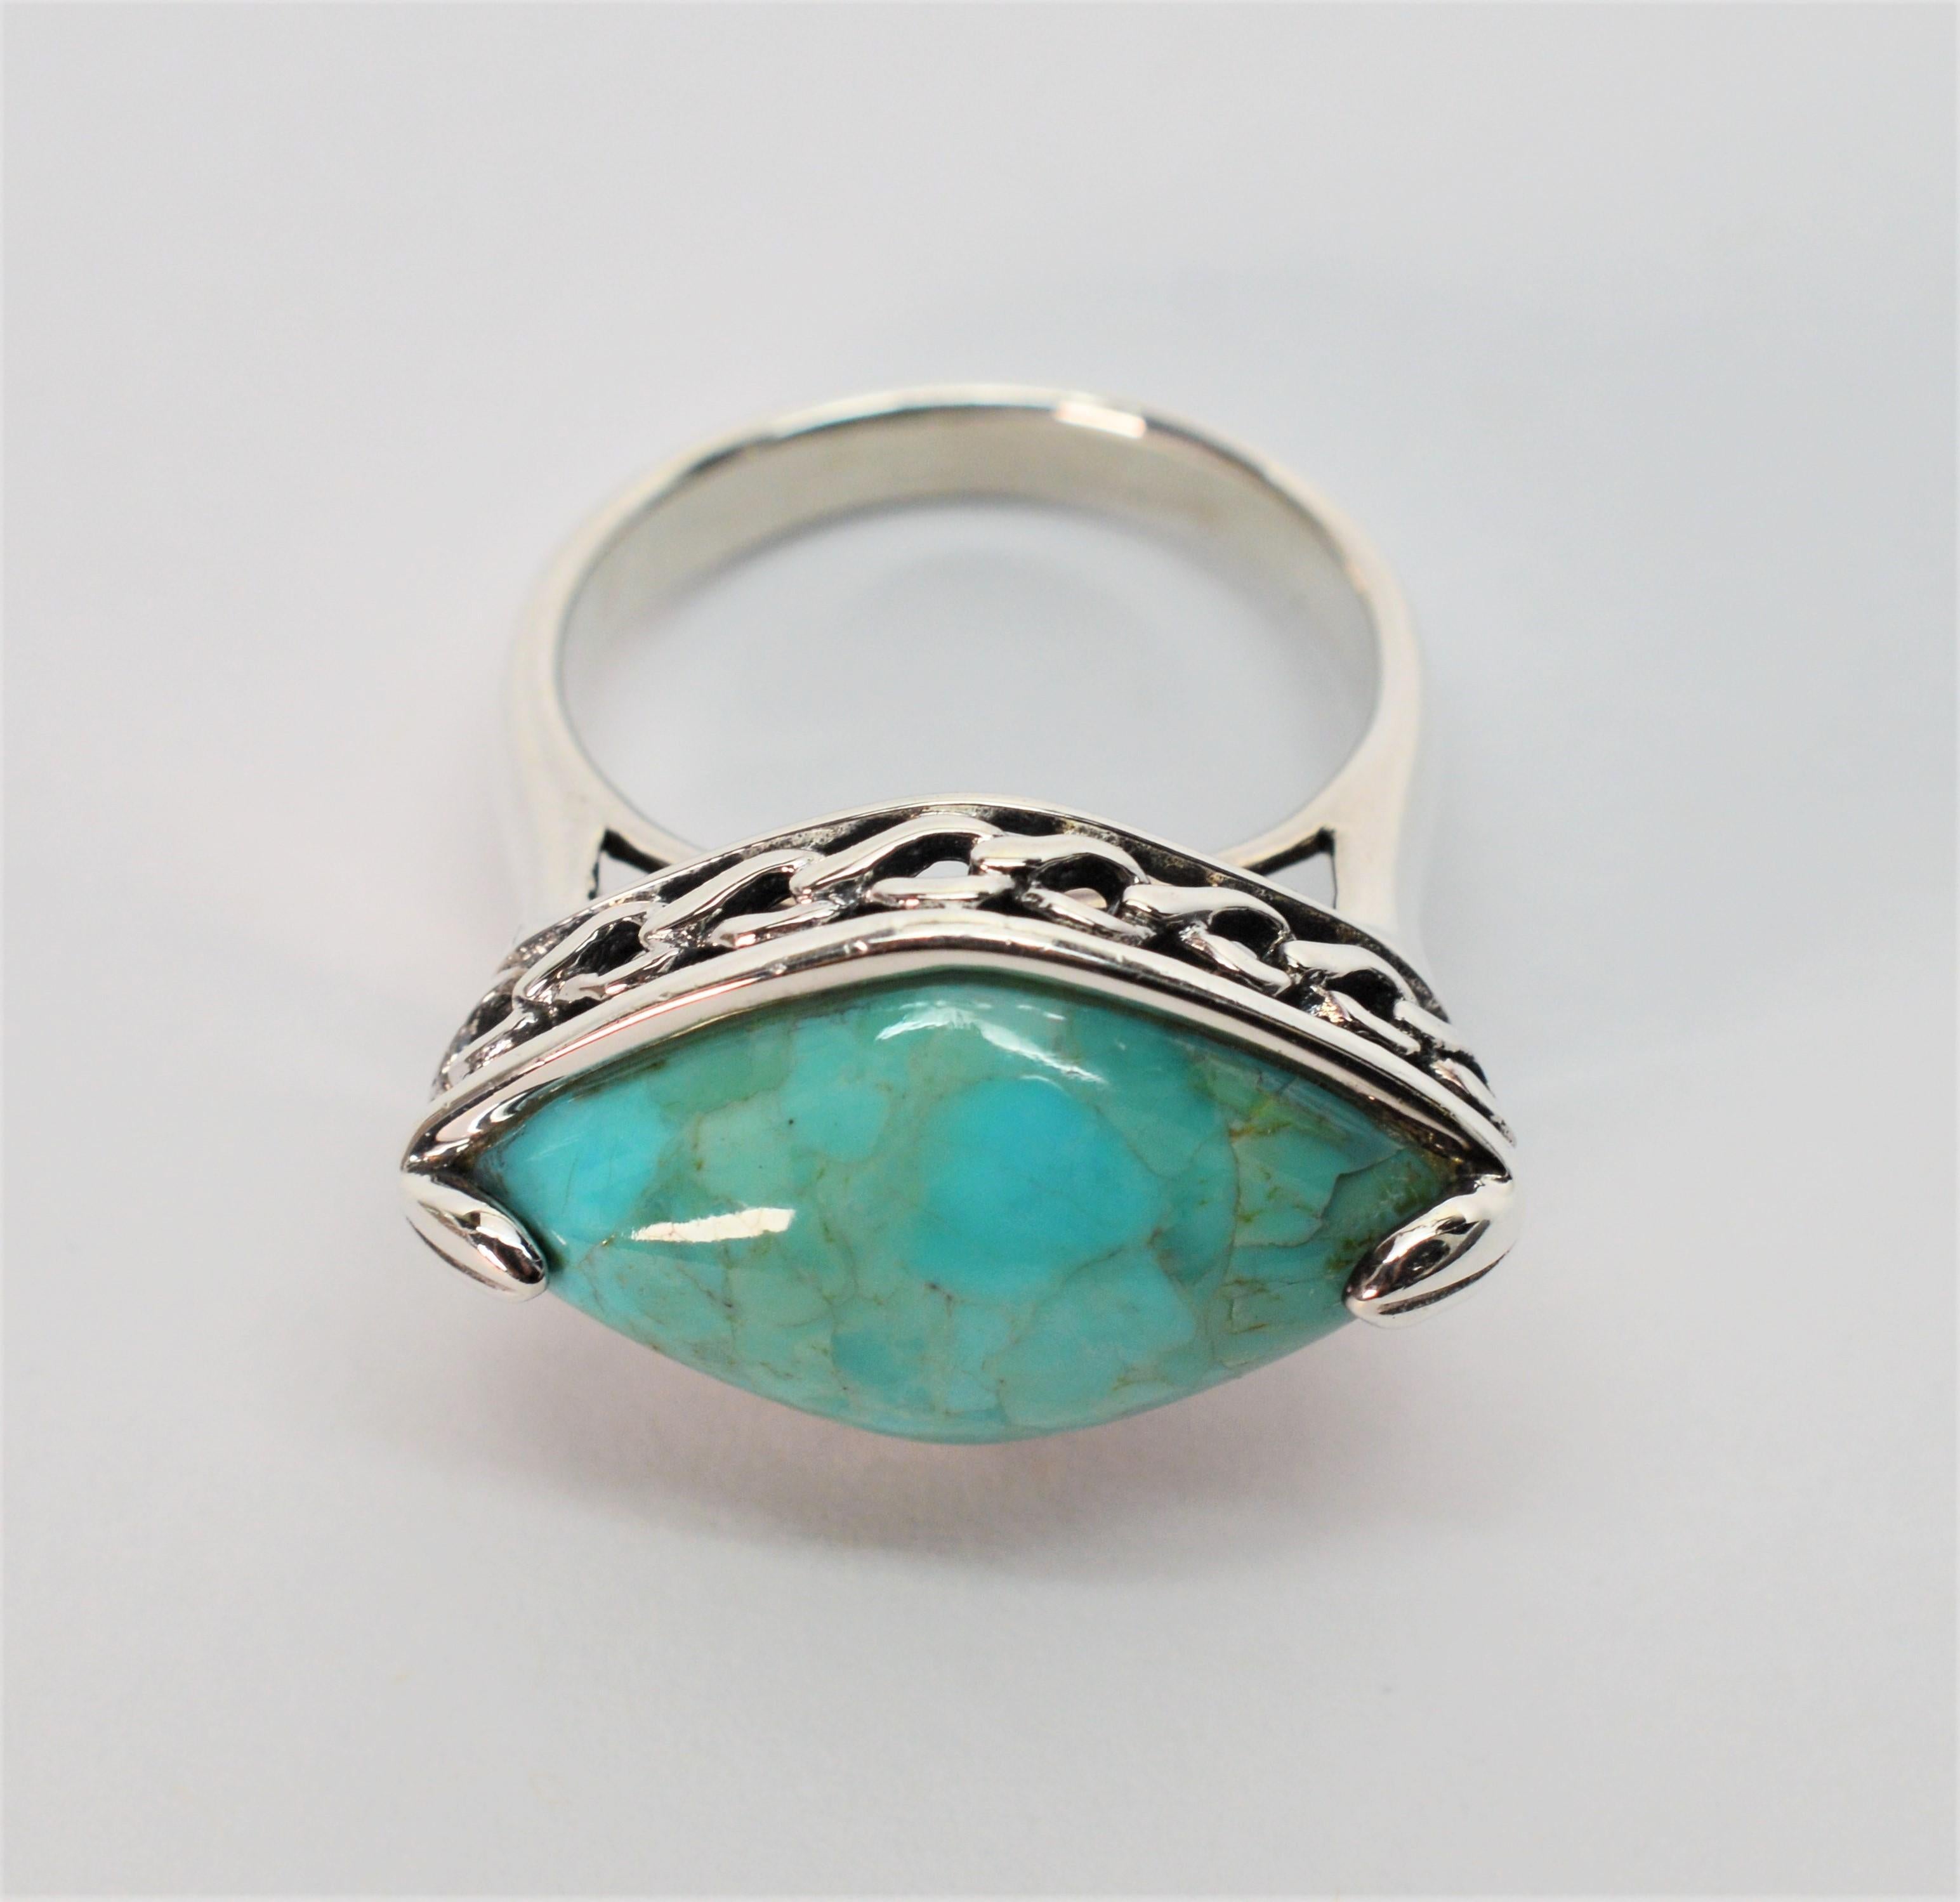 In an unusual horizontally designed ring setting, this large strong blue-green naturally marbled marquise cut 14 x 23mm polished turquoise cabochon certainly attracts attention. Made in sterling silver, a raised gallery prominently displays this